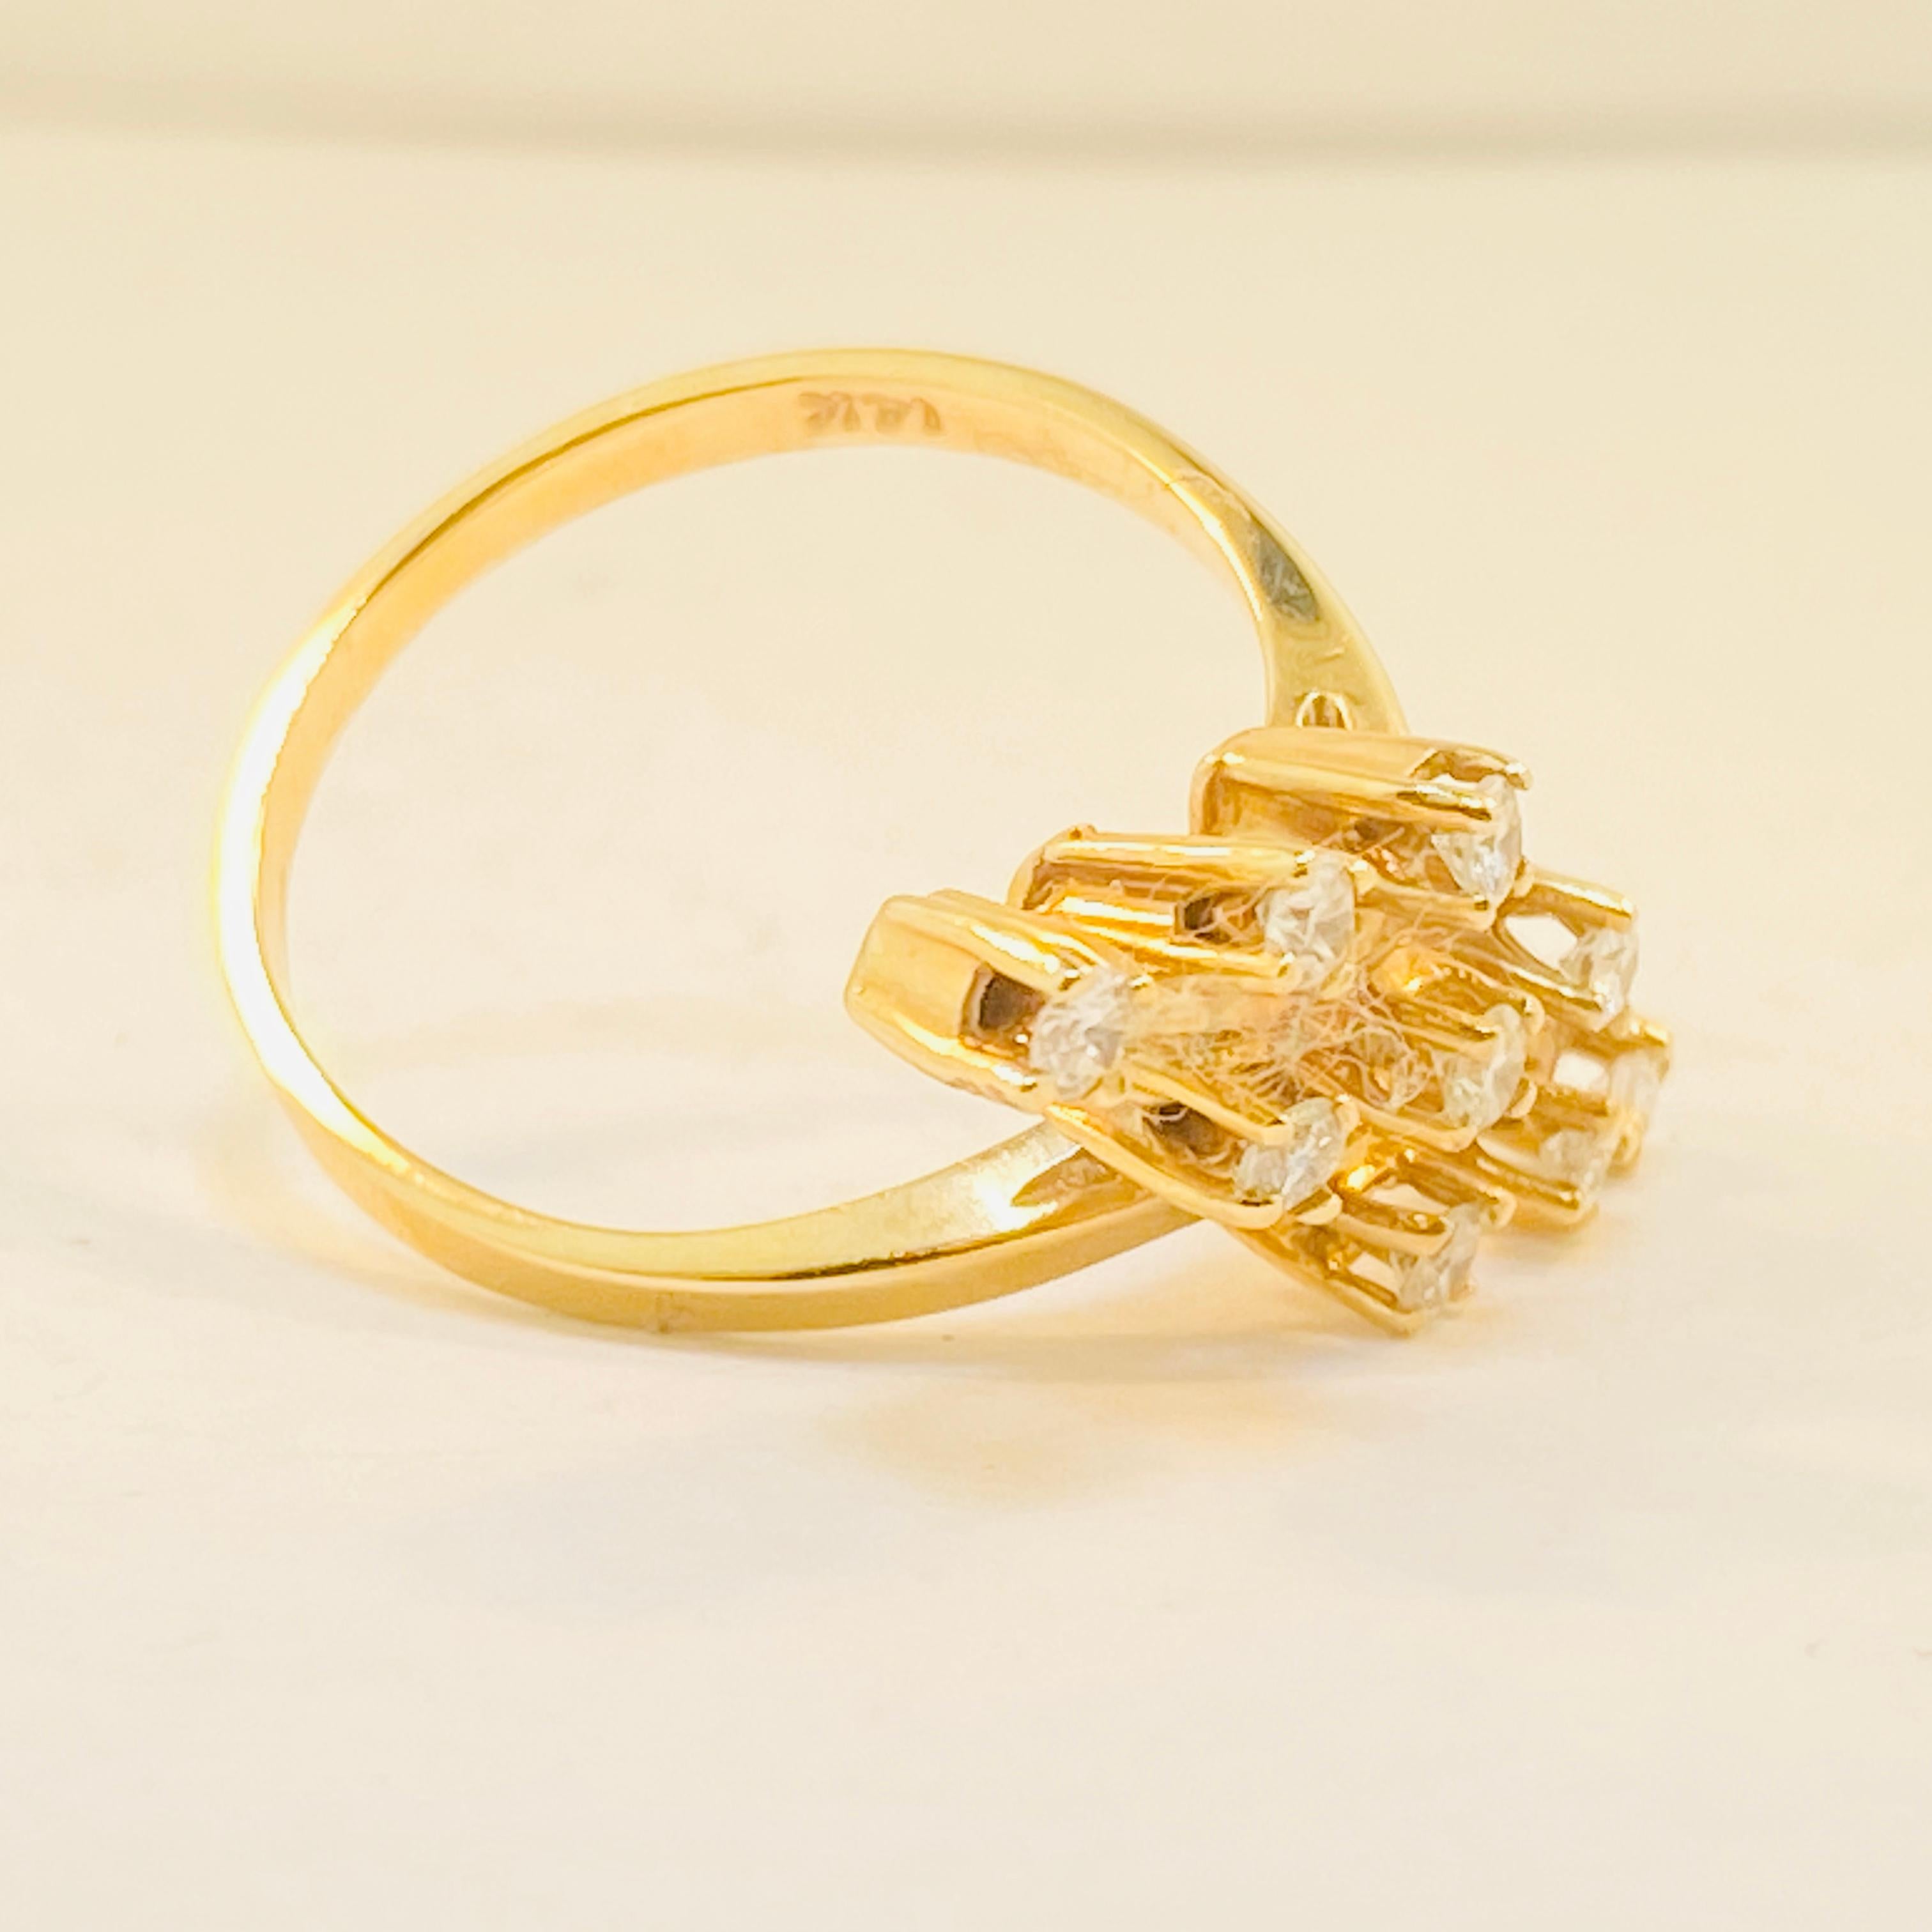 This ring has elegance and grace to it! This 14 Karat Yellow Gold Diamond ring is a gorgeous piece that will stand out anywhere you go!

14 Karat Yellow Gold
Diamonds (9) - 0.30 Total Carat Weight 
Diamond Clarity-VS1 (Excellent)
Diamond Color-G